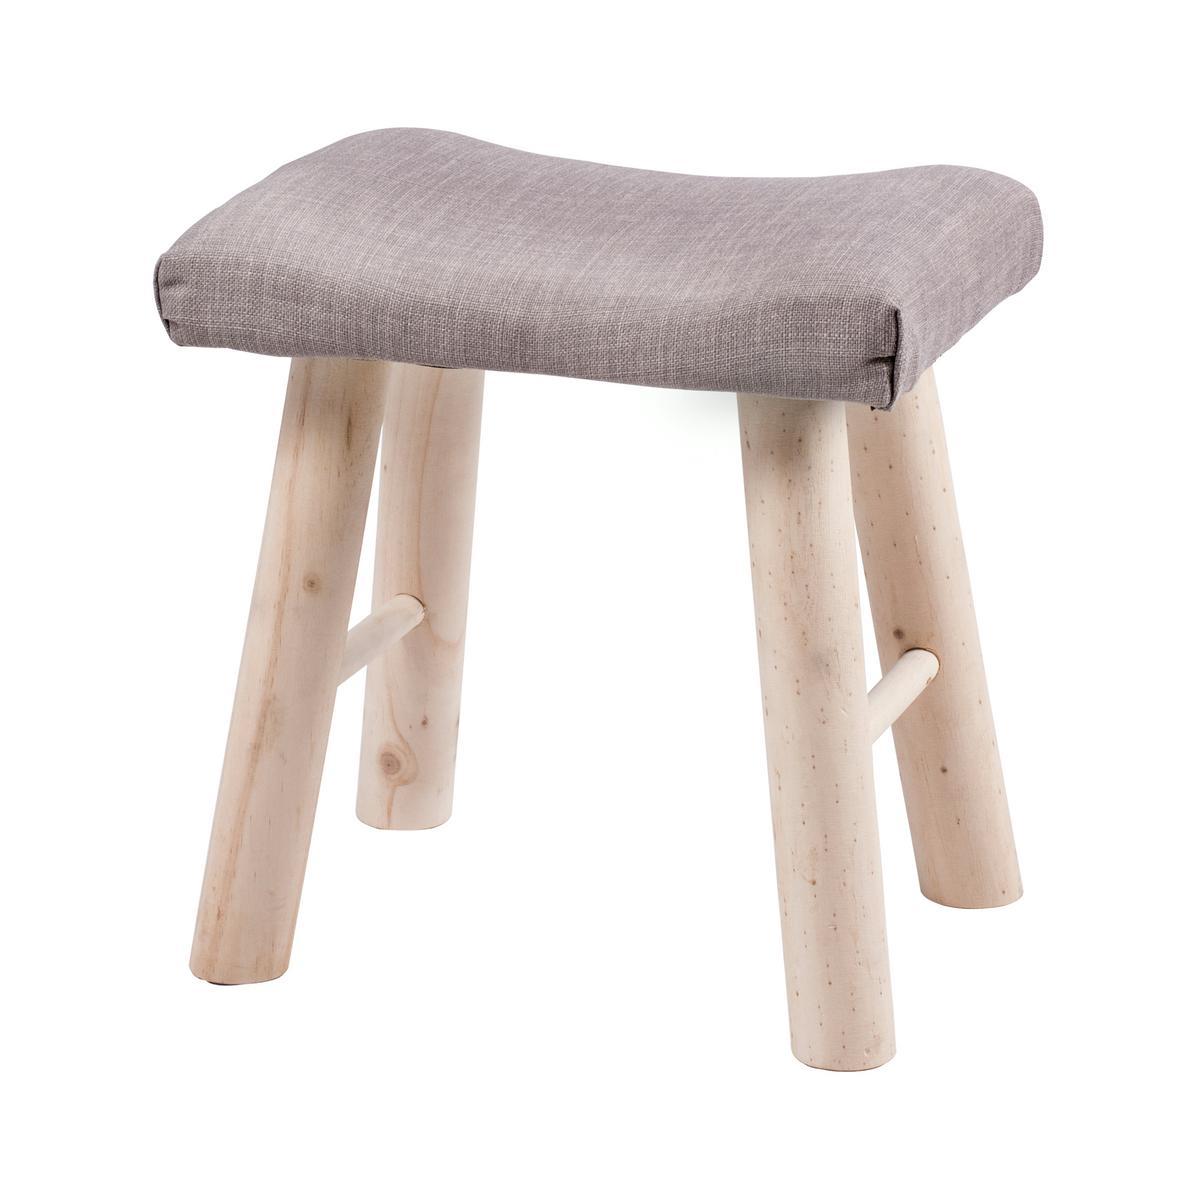 Tabouret campagne - Pin et polyester - 38 x 28 x H 38 cm - Beige